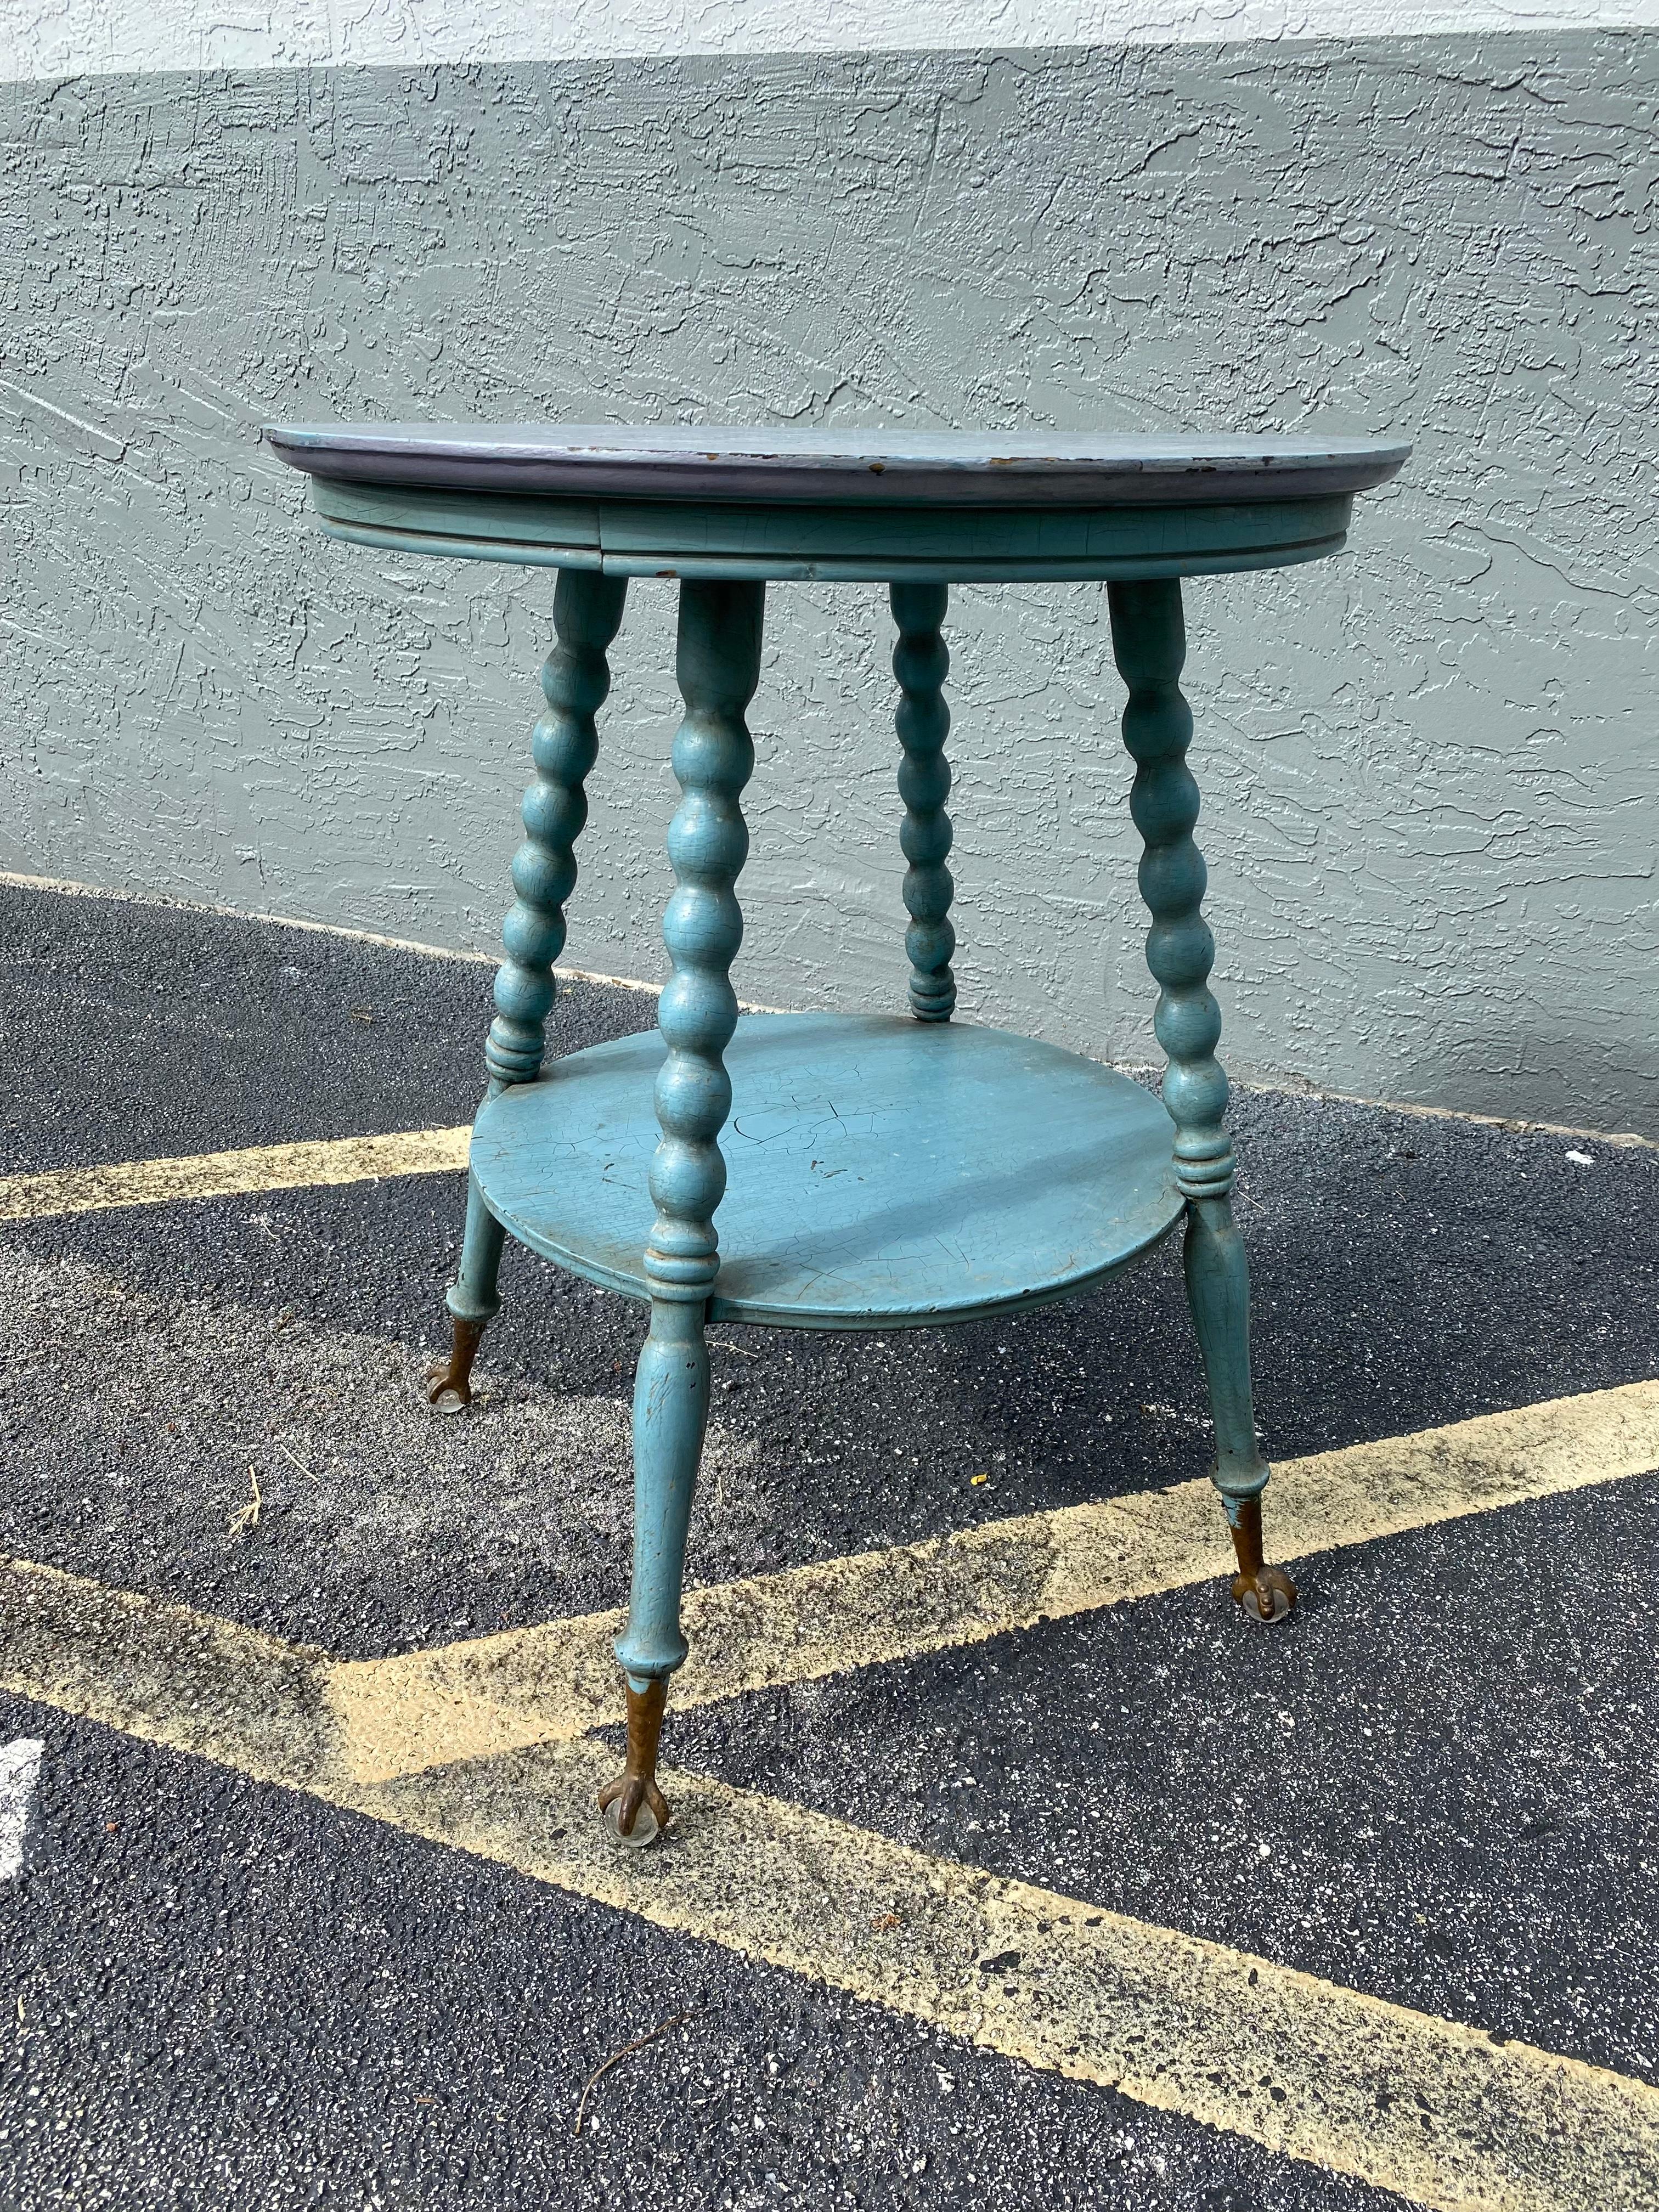 Mid-20th Century 1940s Ball and Claw Round Wood Turquoise Table For Sale